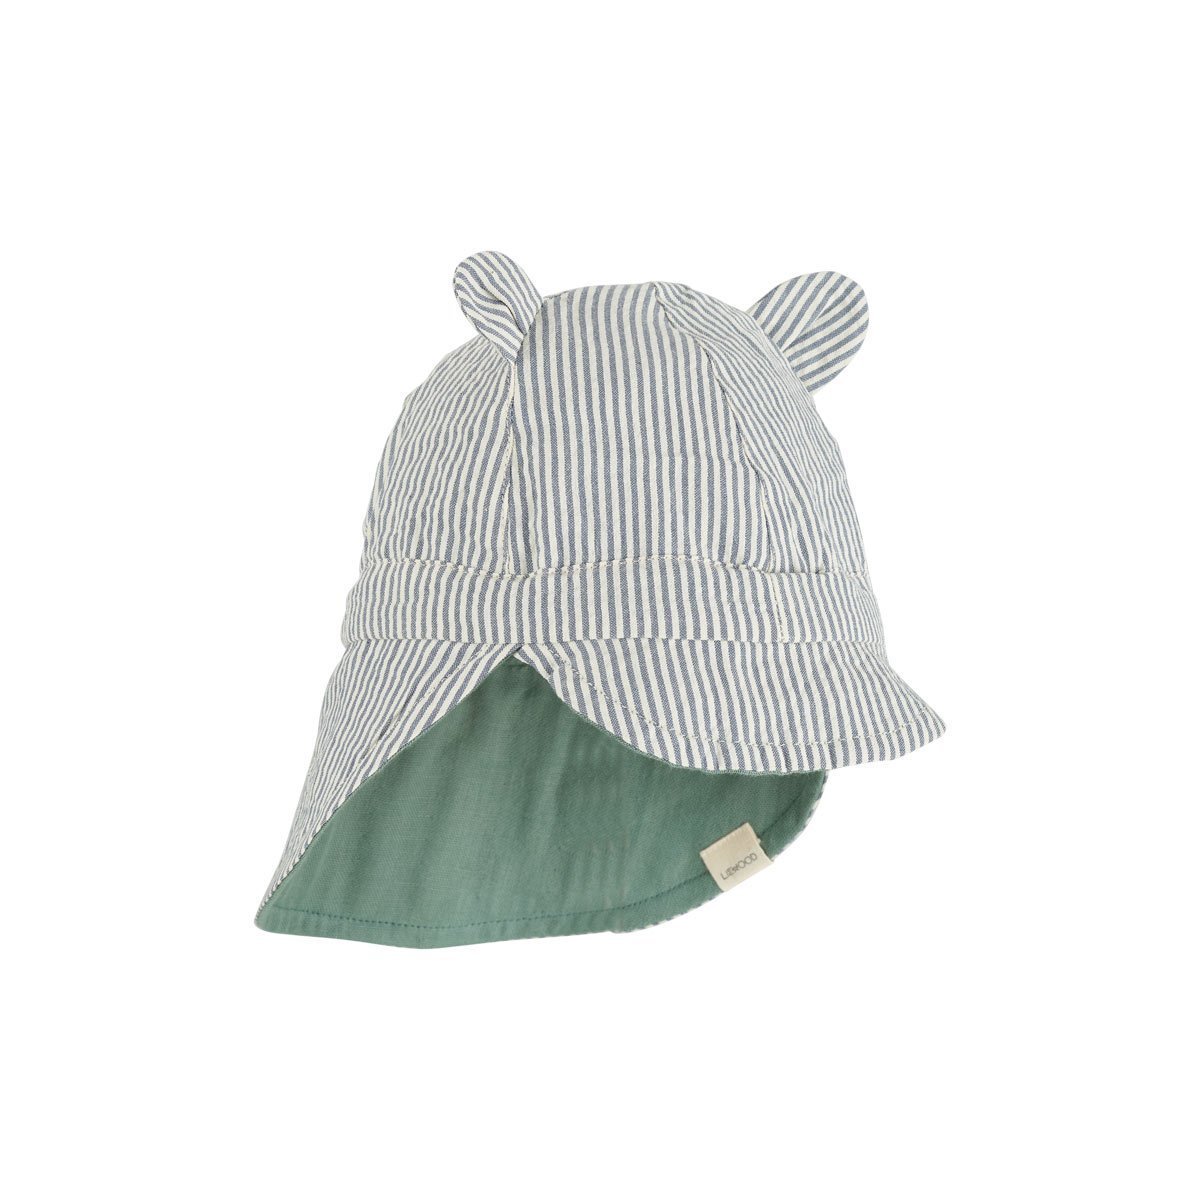 Liewood Cosmo Sun Hat in Peppermint - Scandibørn